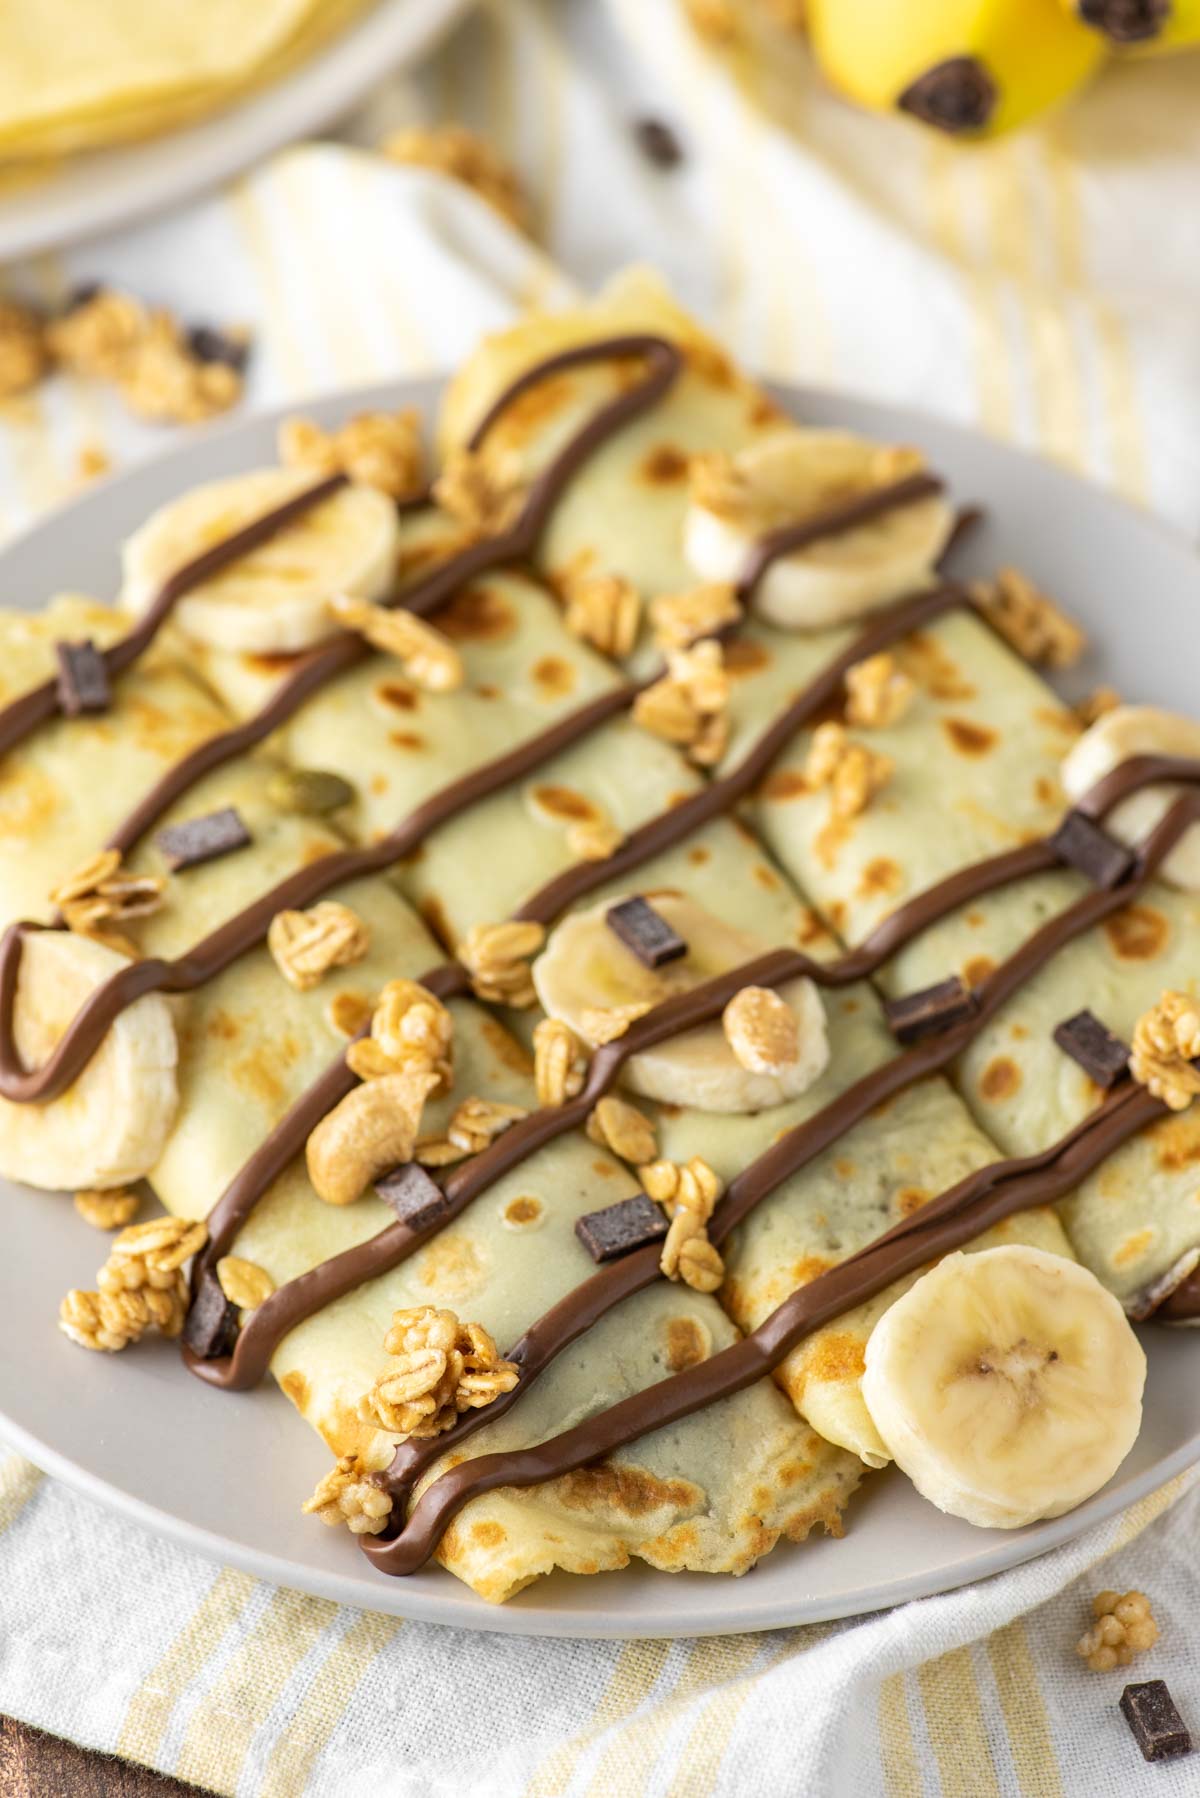 banana Nutella crepes on plate